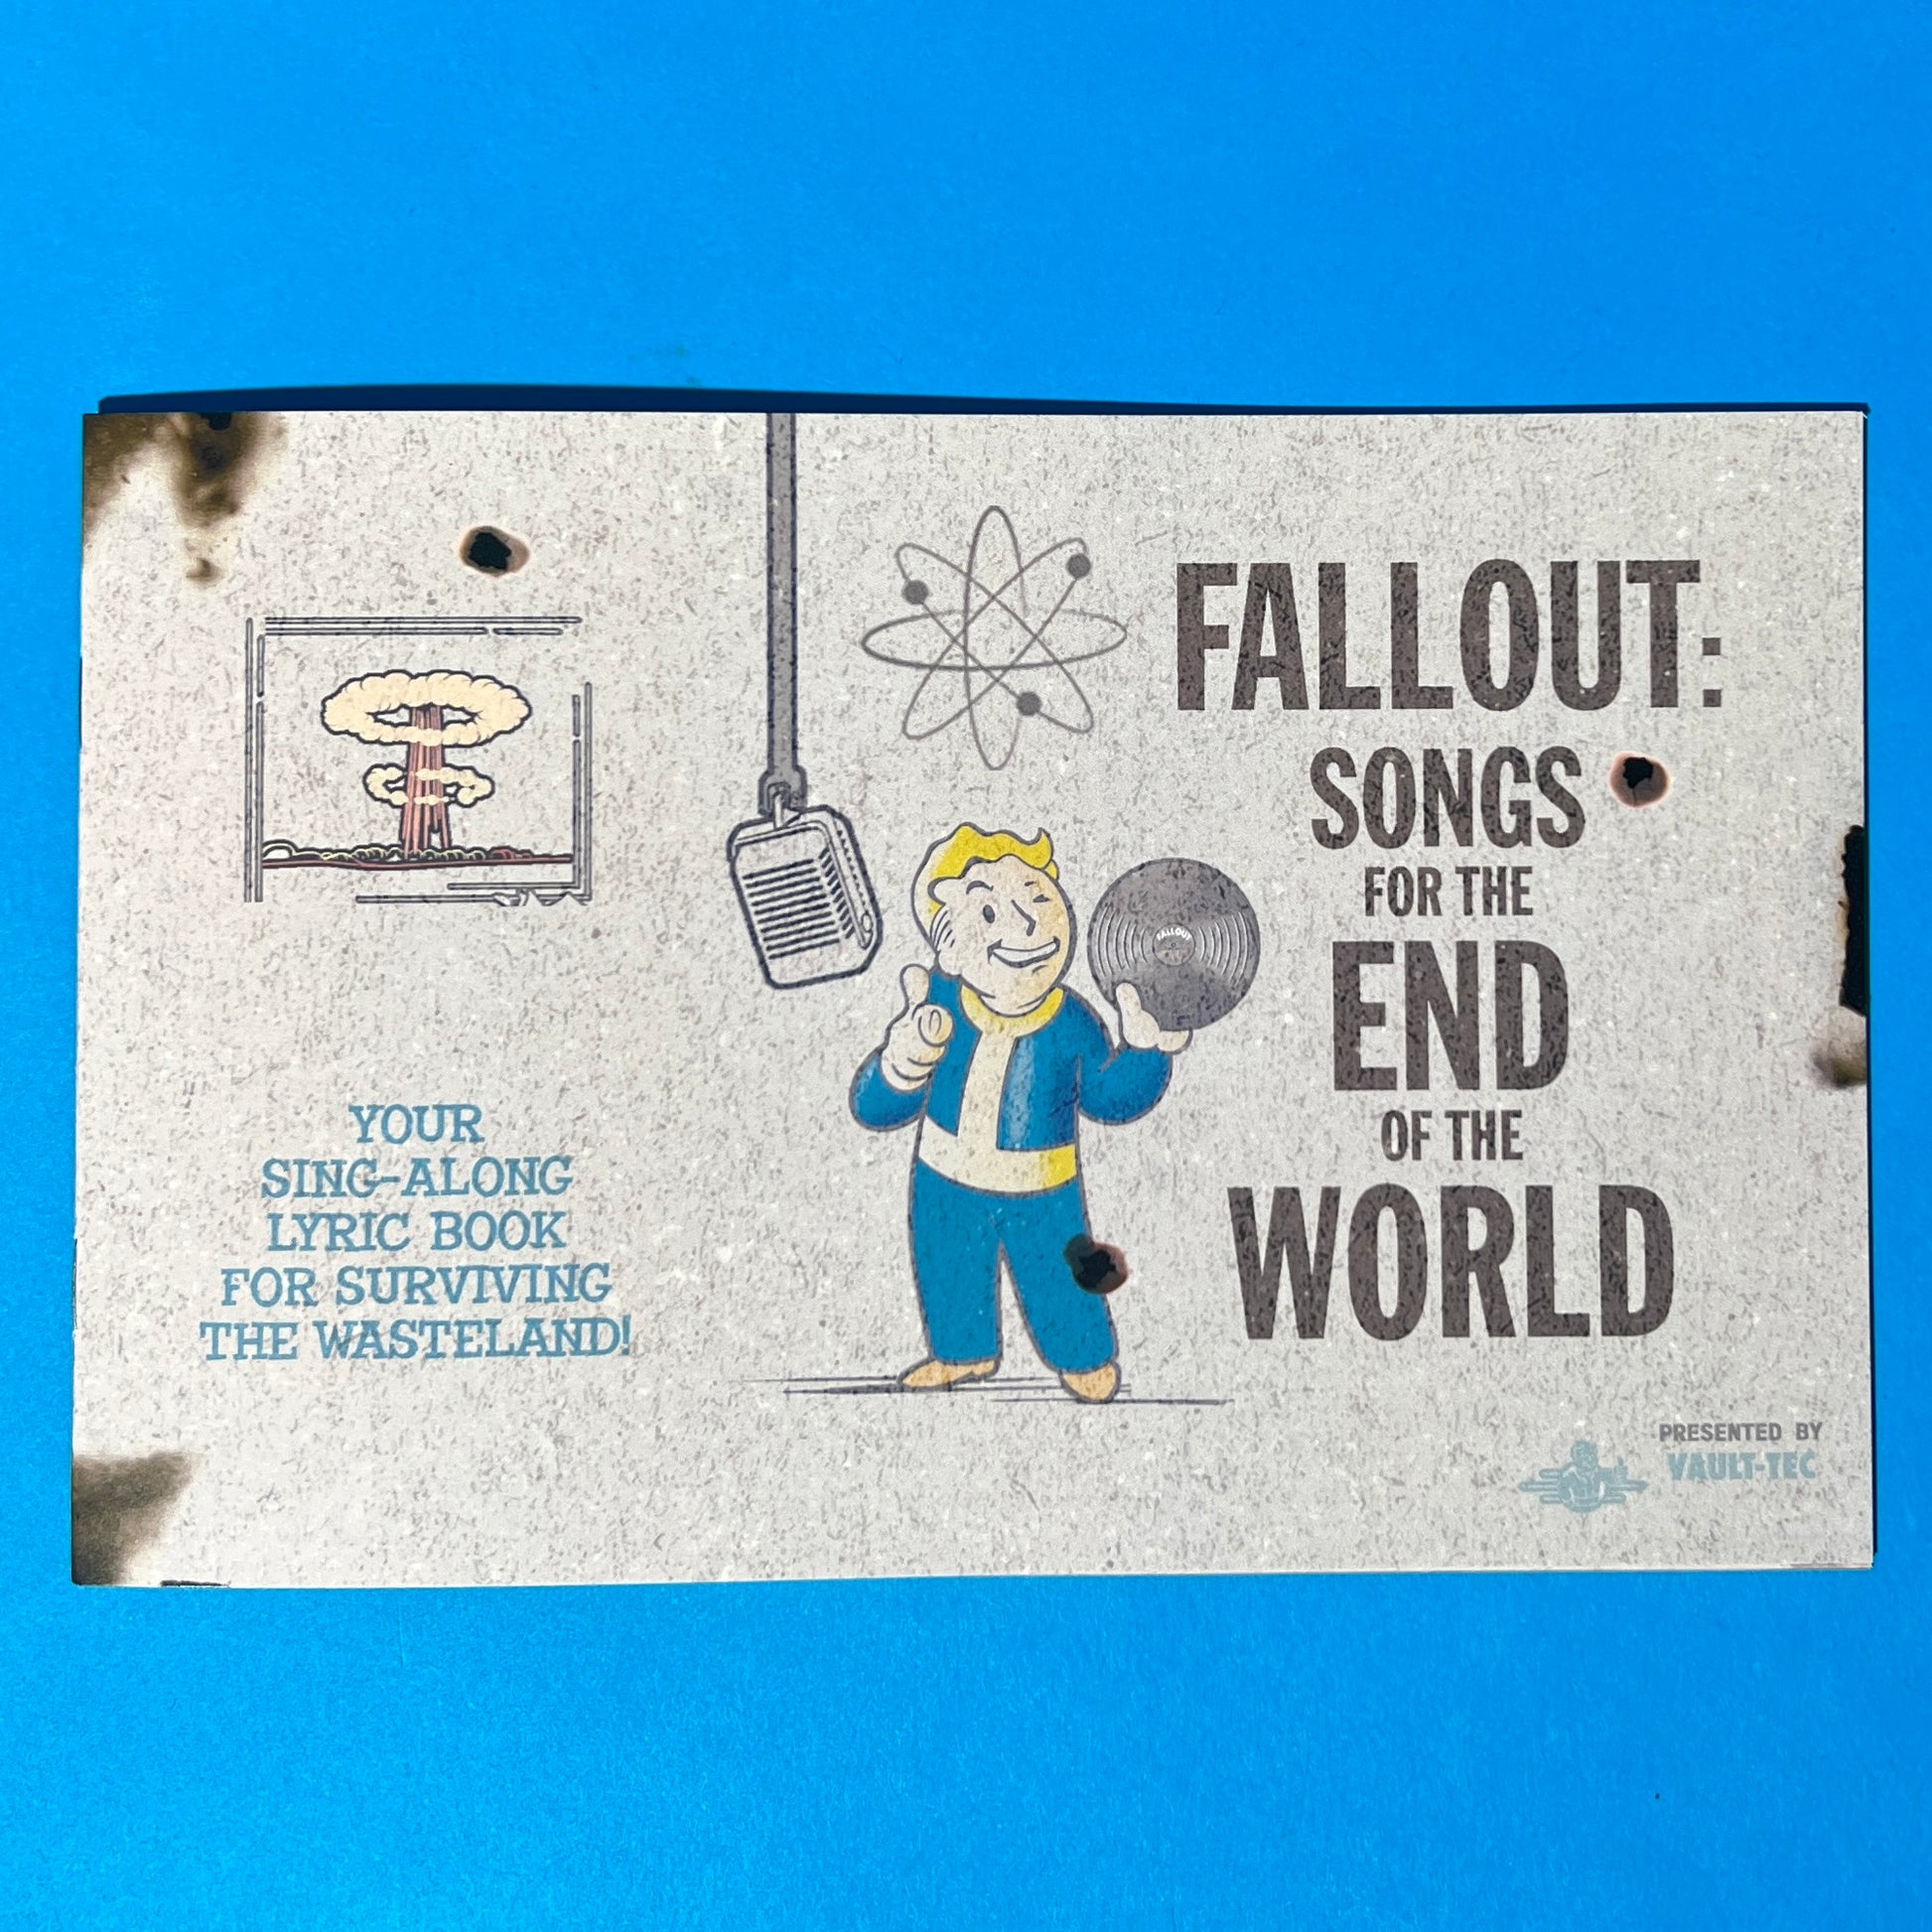 Crawl Out Through The Fallout - Vinyl Reissue! : r/fo4